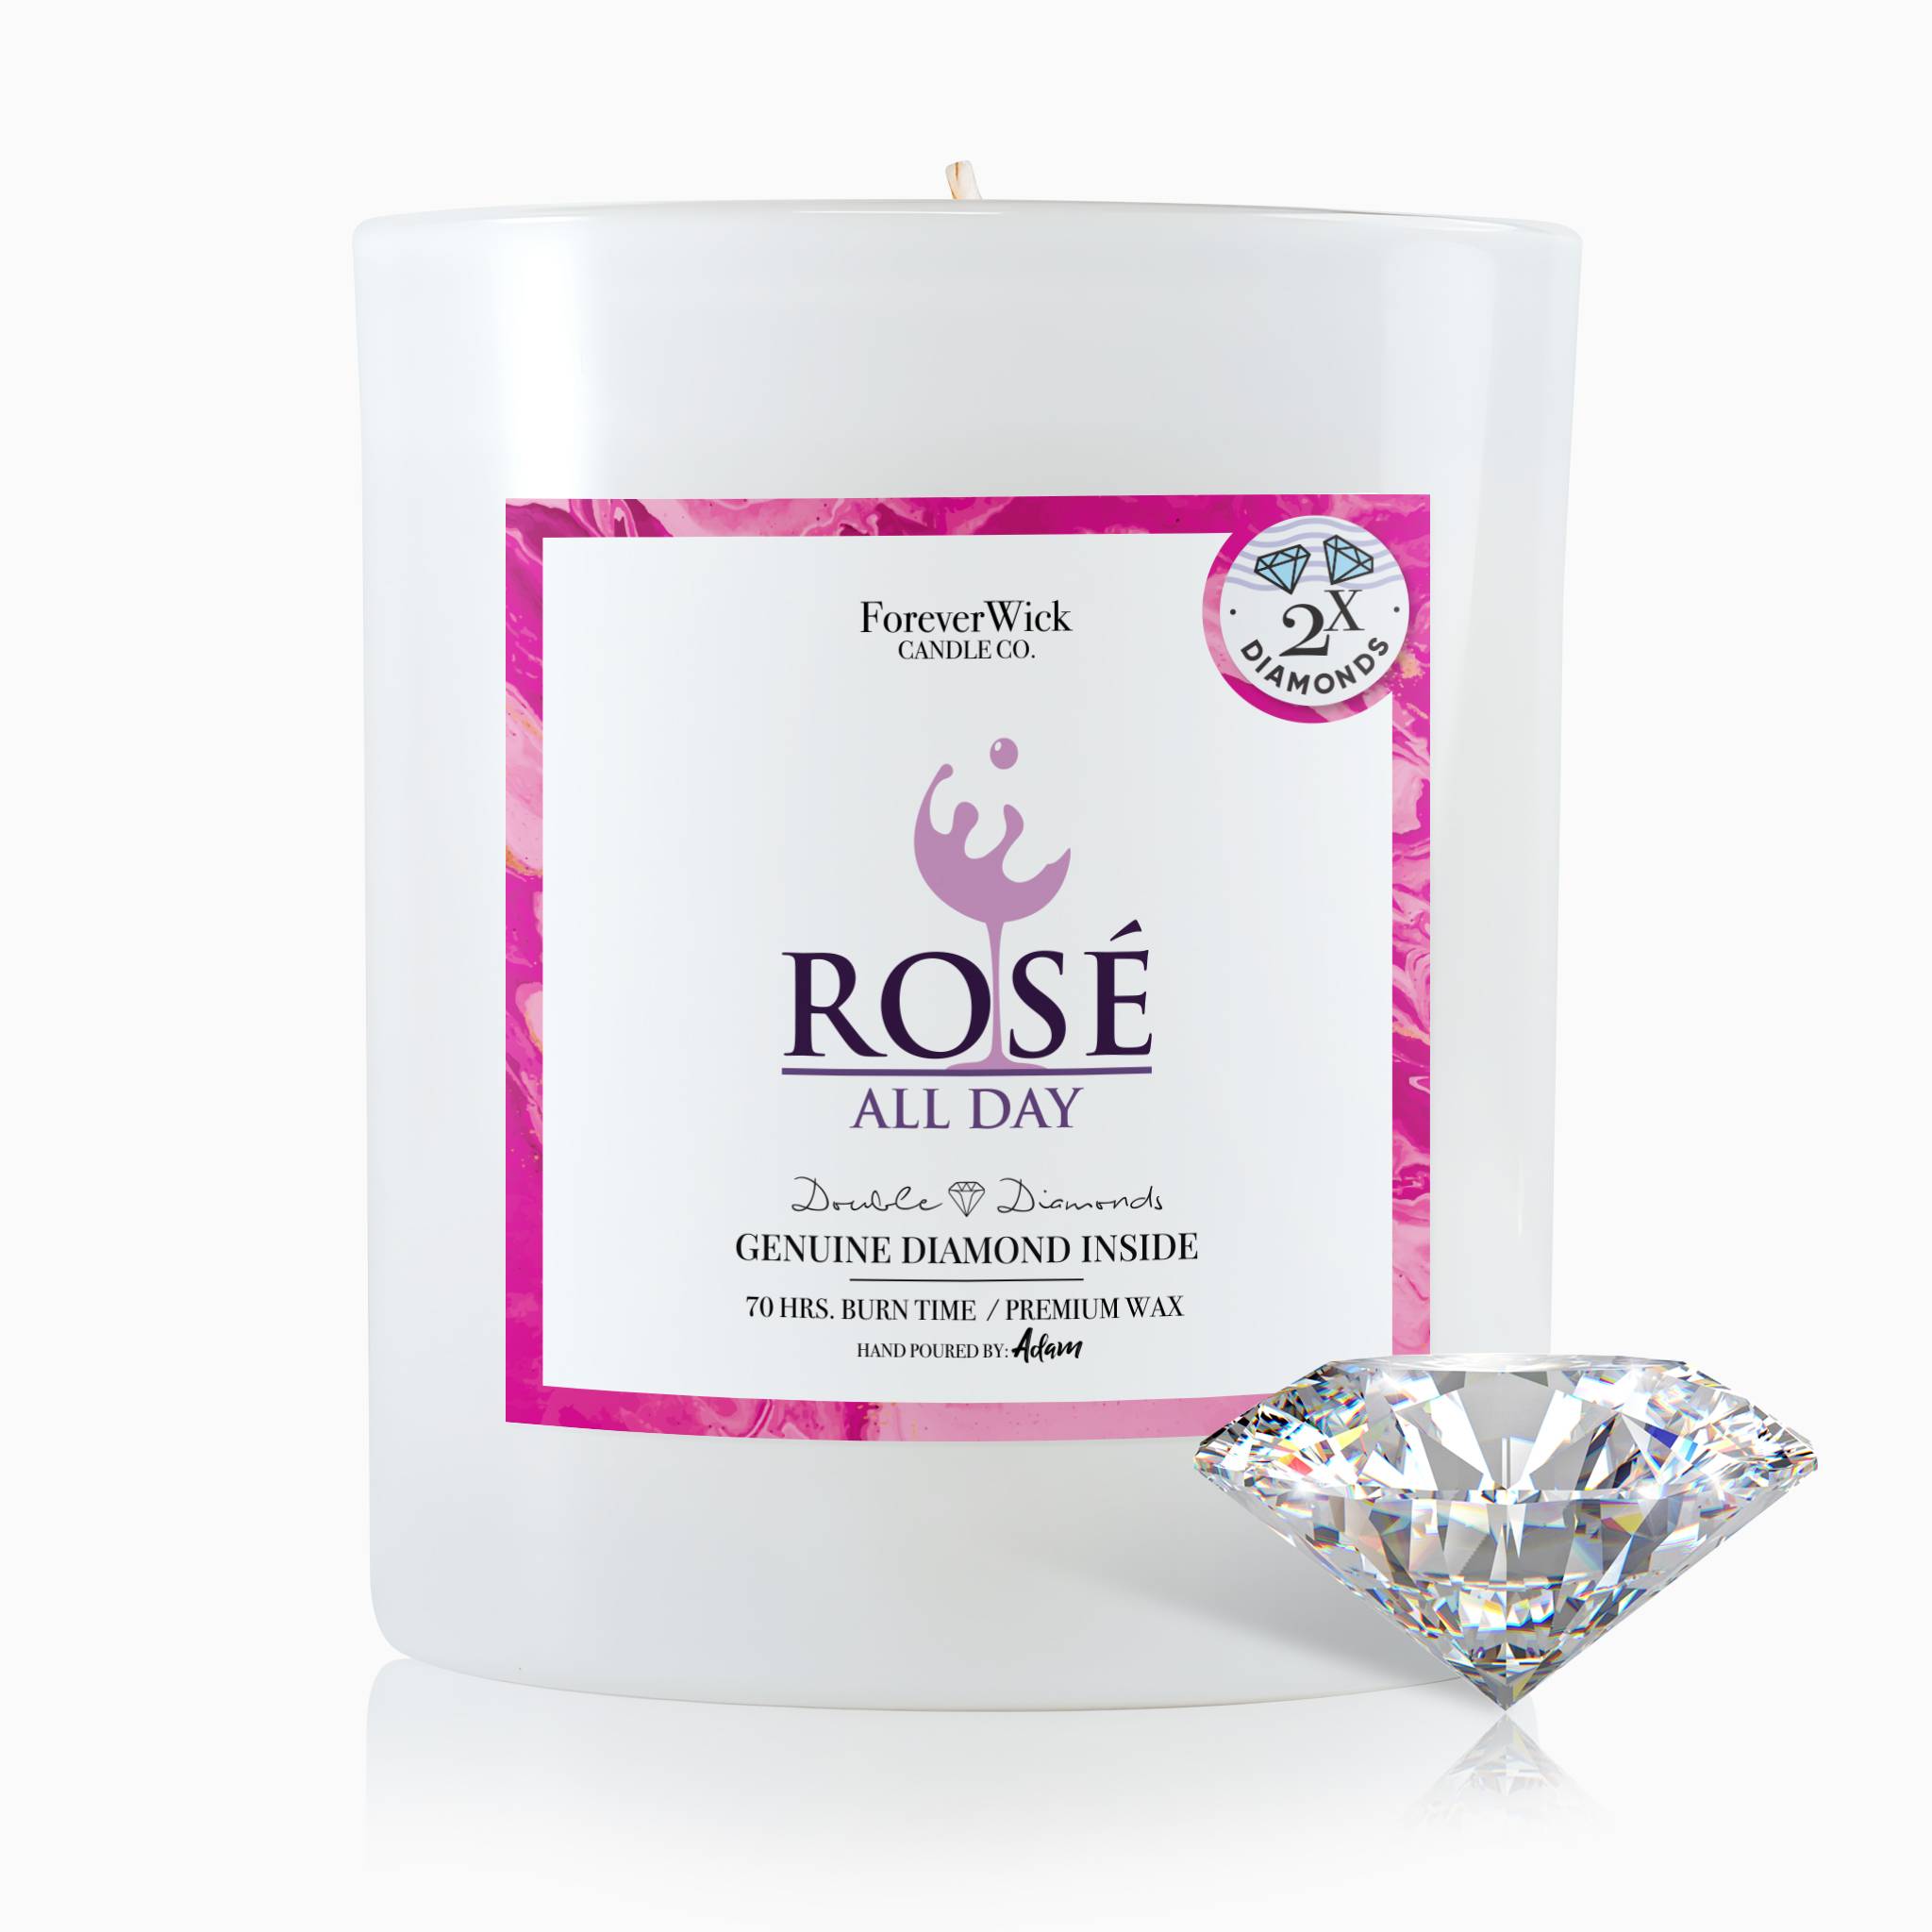 Rosè All Day Double Diamond Candle